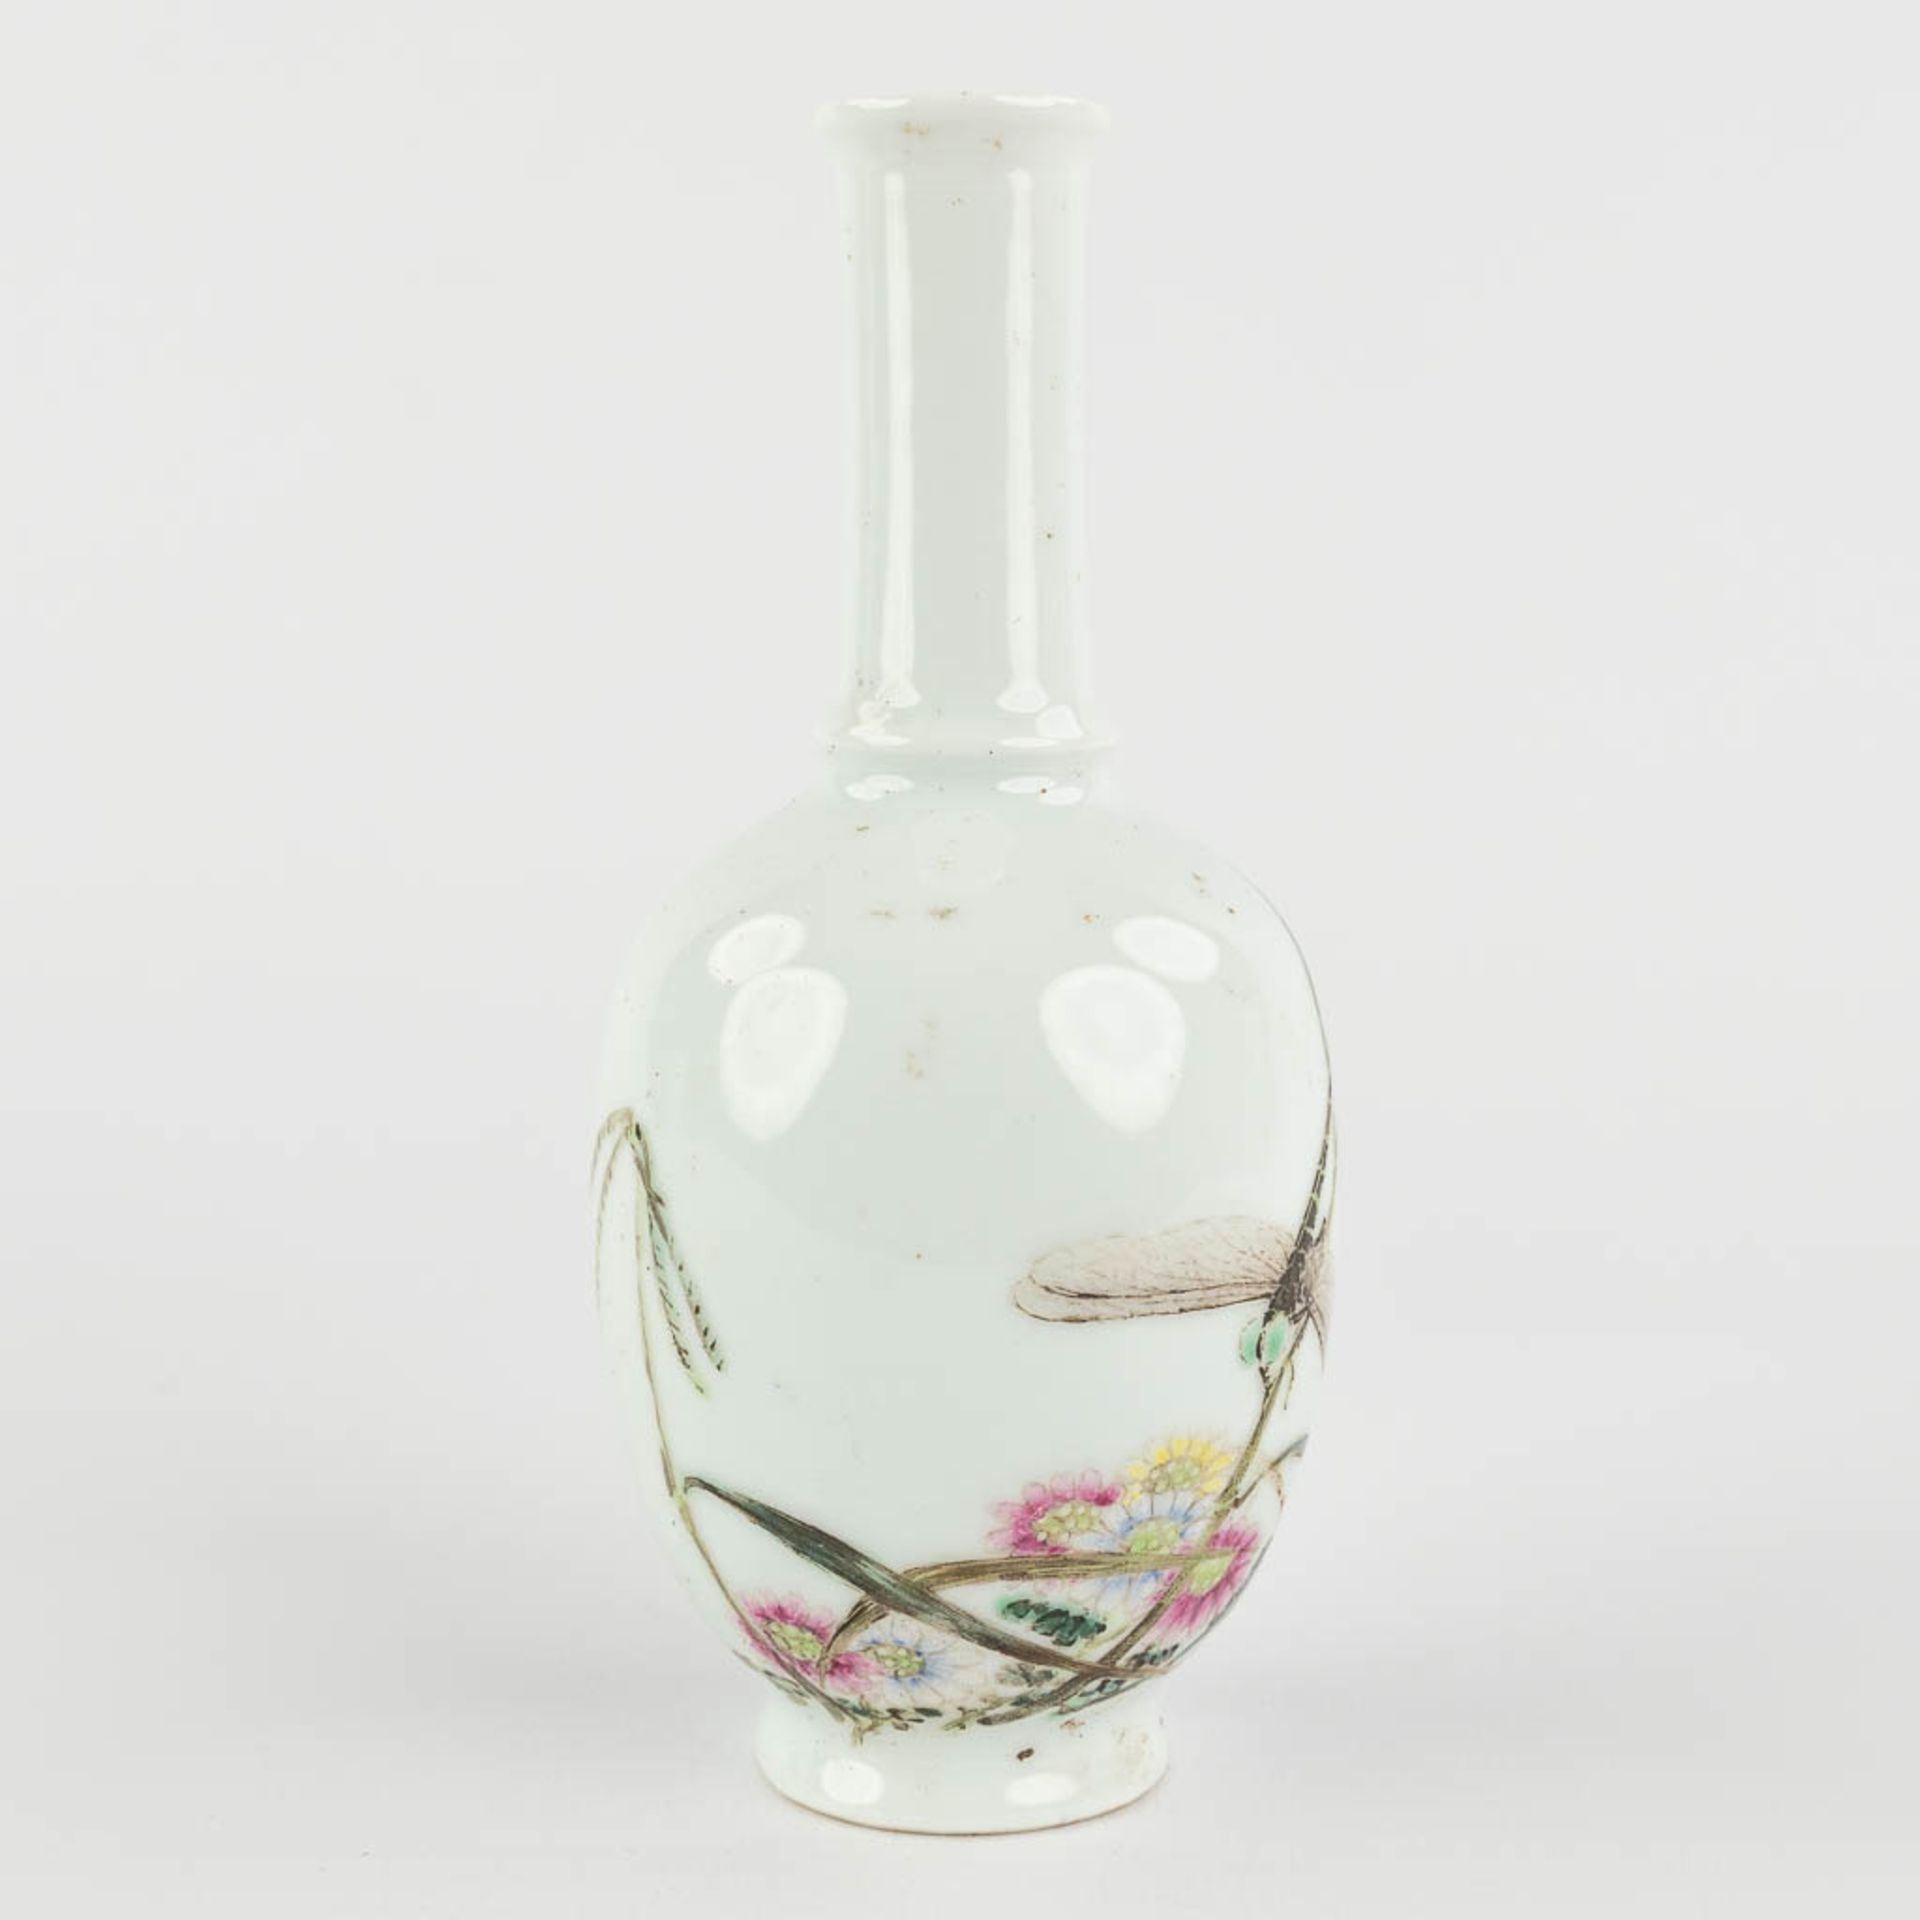 Li mingliang, A Chinese vase with decor of a dragonfly. 20th C. (H:14 x D:6,5 cm) - Bild 3 aus 9